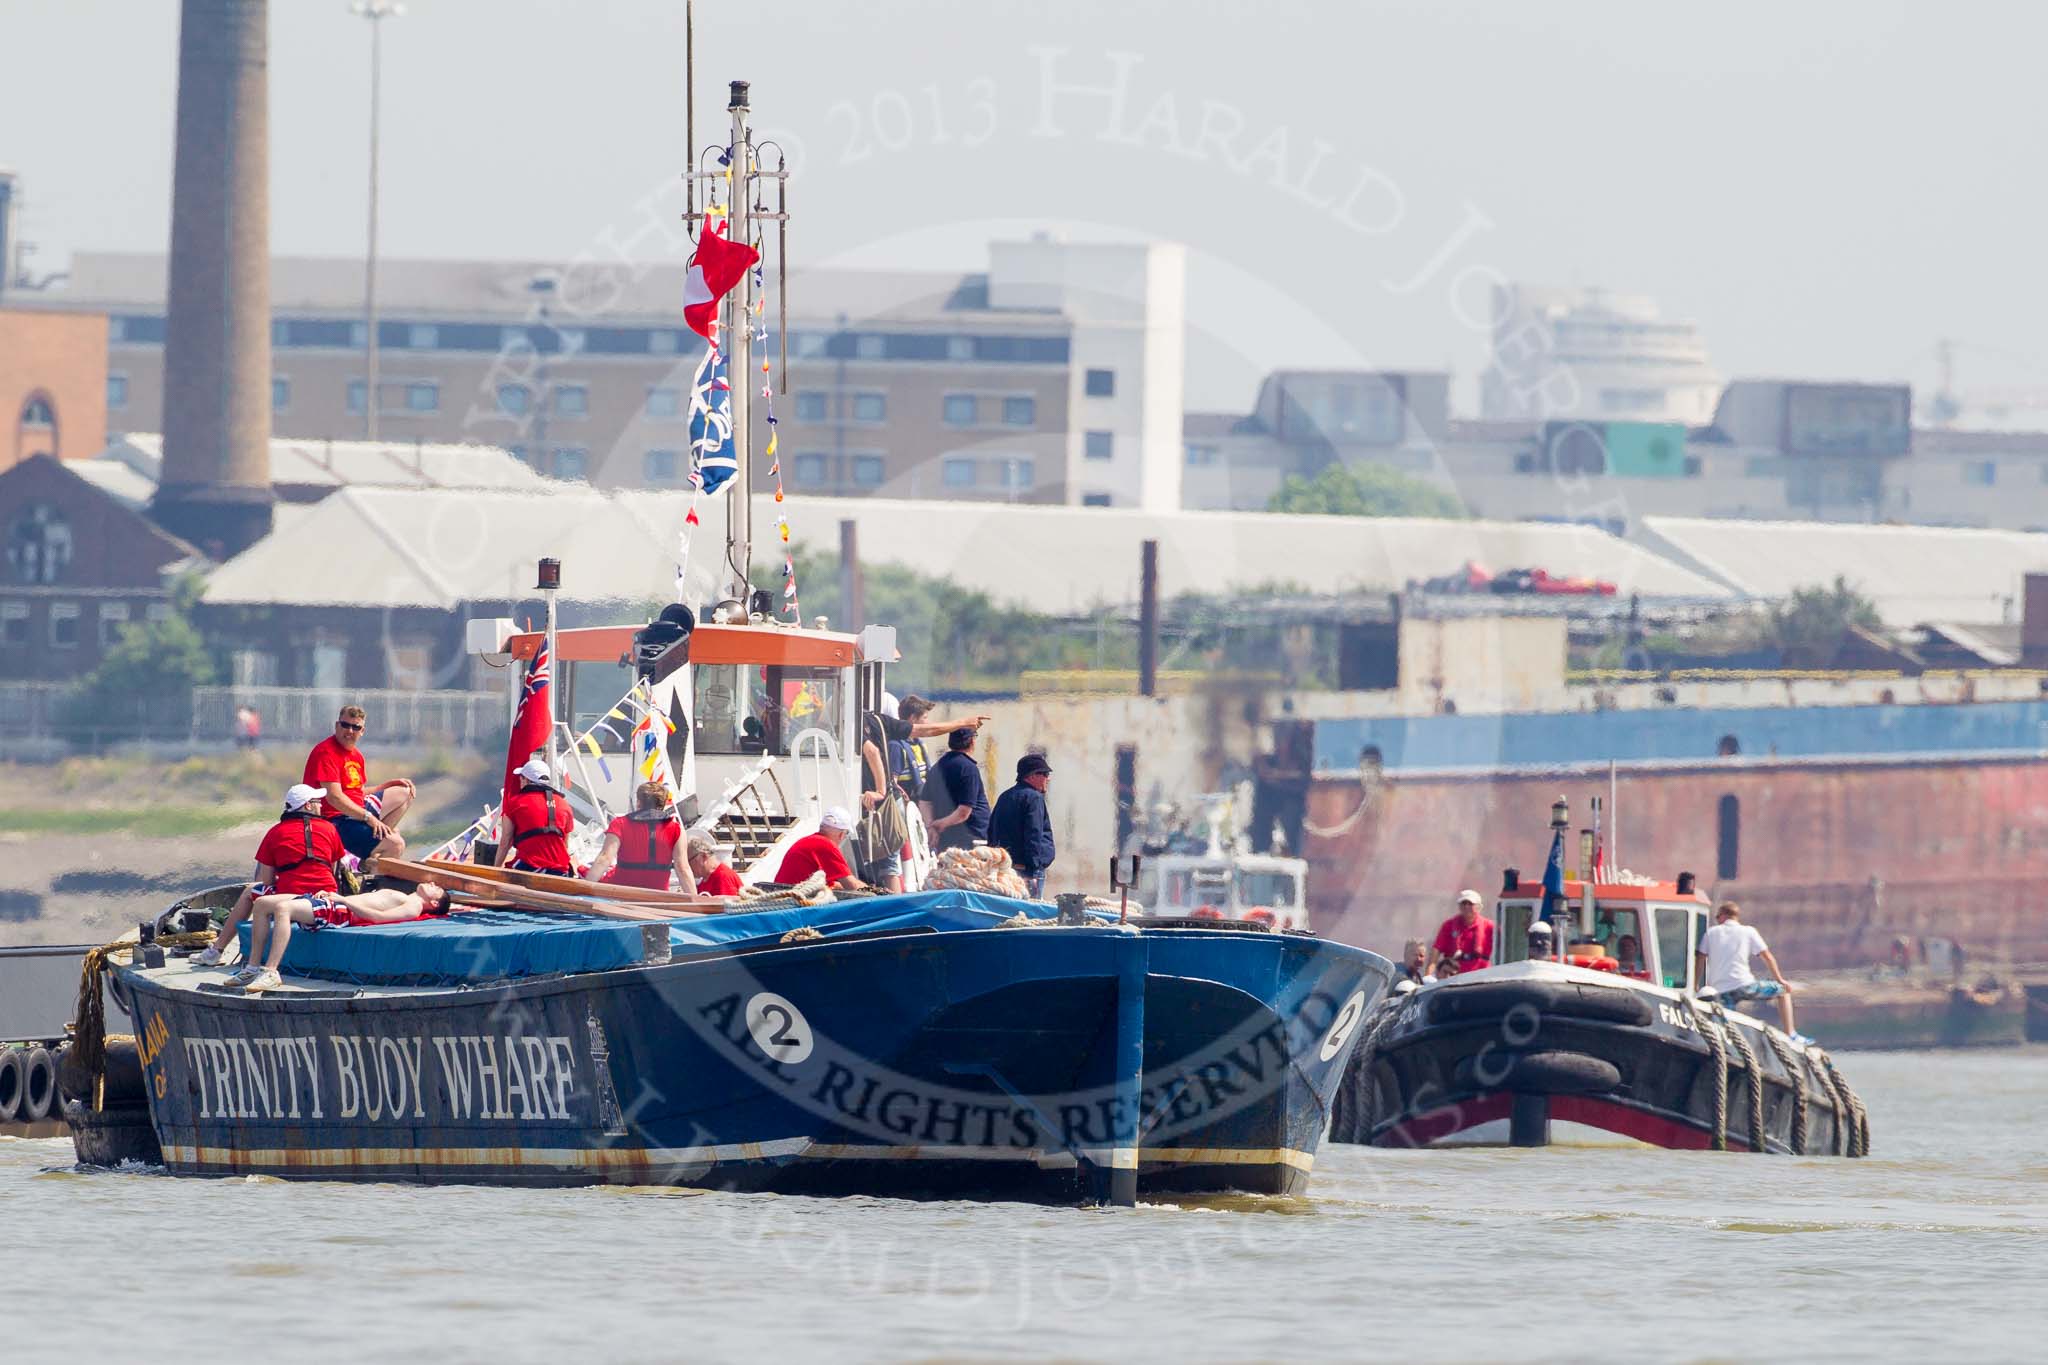 TOW River Thames Barge Driving Race 2013: Barge "Diana", by Trinity Buoy Wharf, is pulled to the start of the race..
River Thames between Greenwich and Westminster,
London,

United Kingdom,
on 13 July 2013 at 11:37, image #33